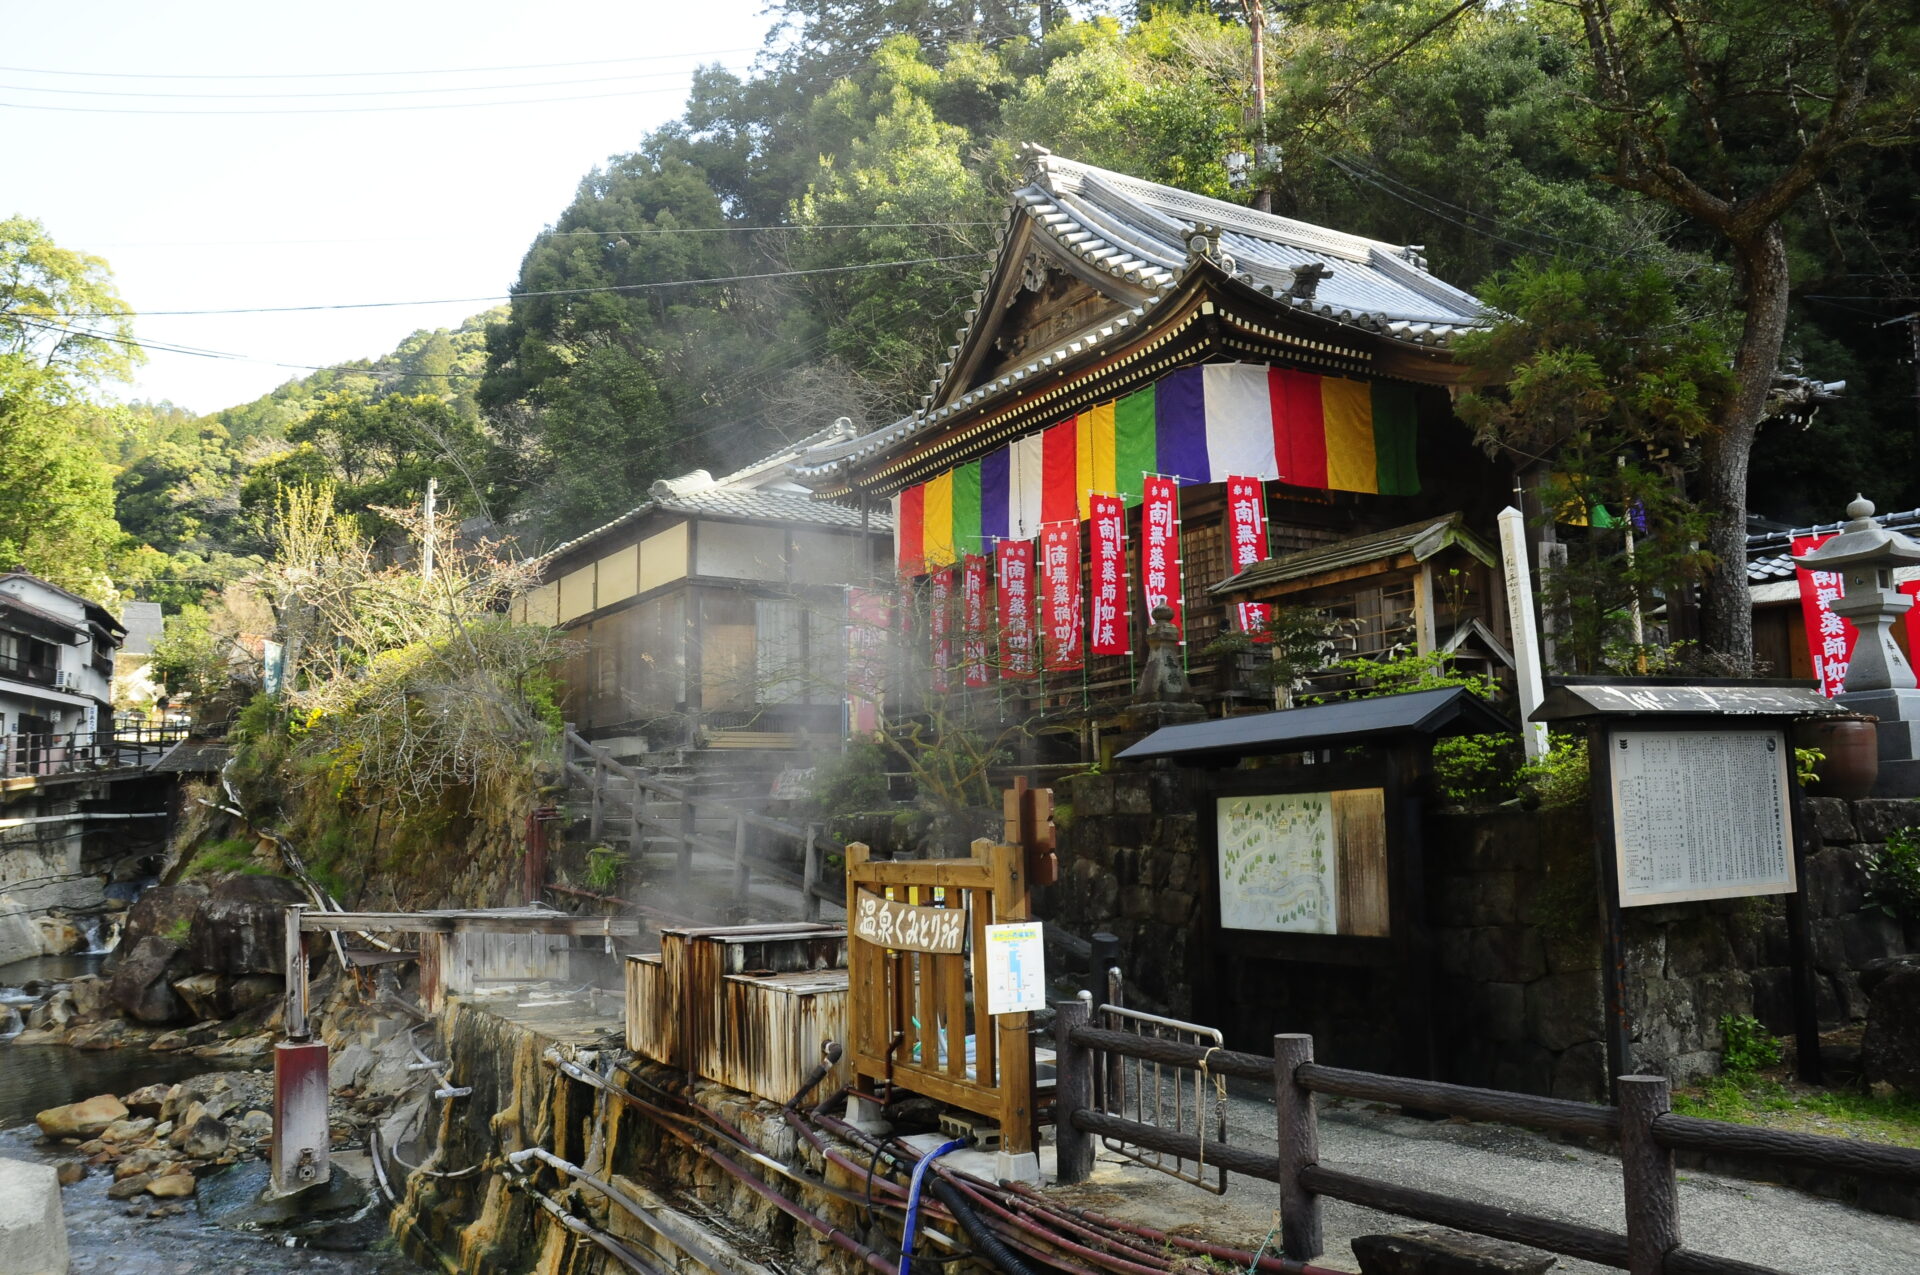 6 recommended inns in Kumano Kodo. Hotels and guest houses where you can enjoy hot springs or BBQ!